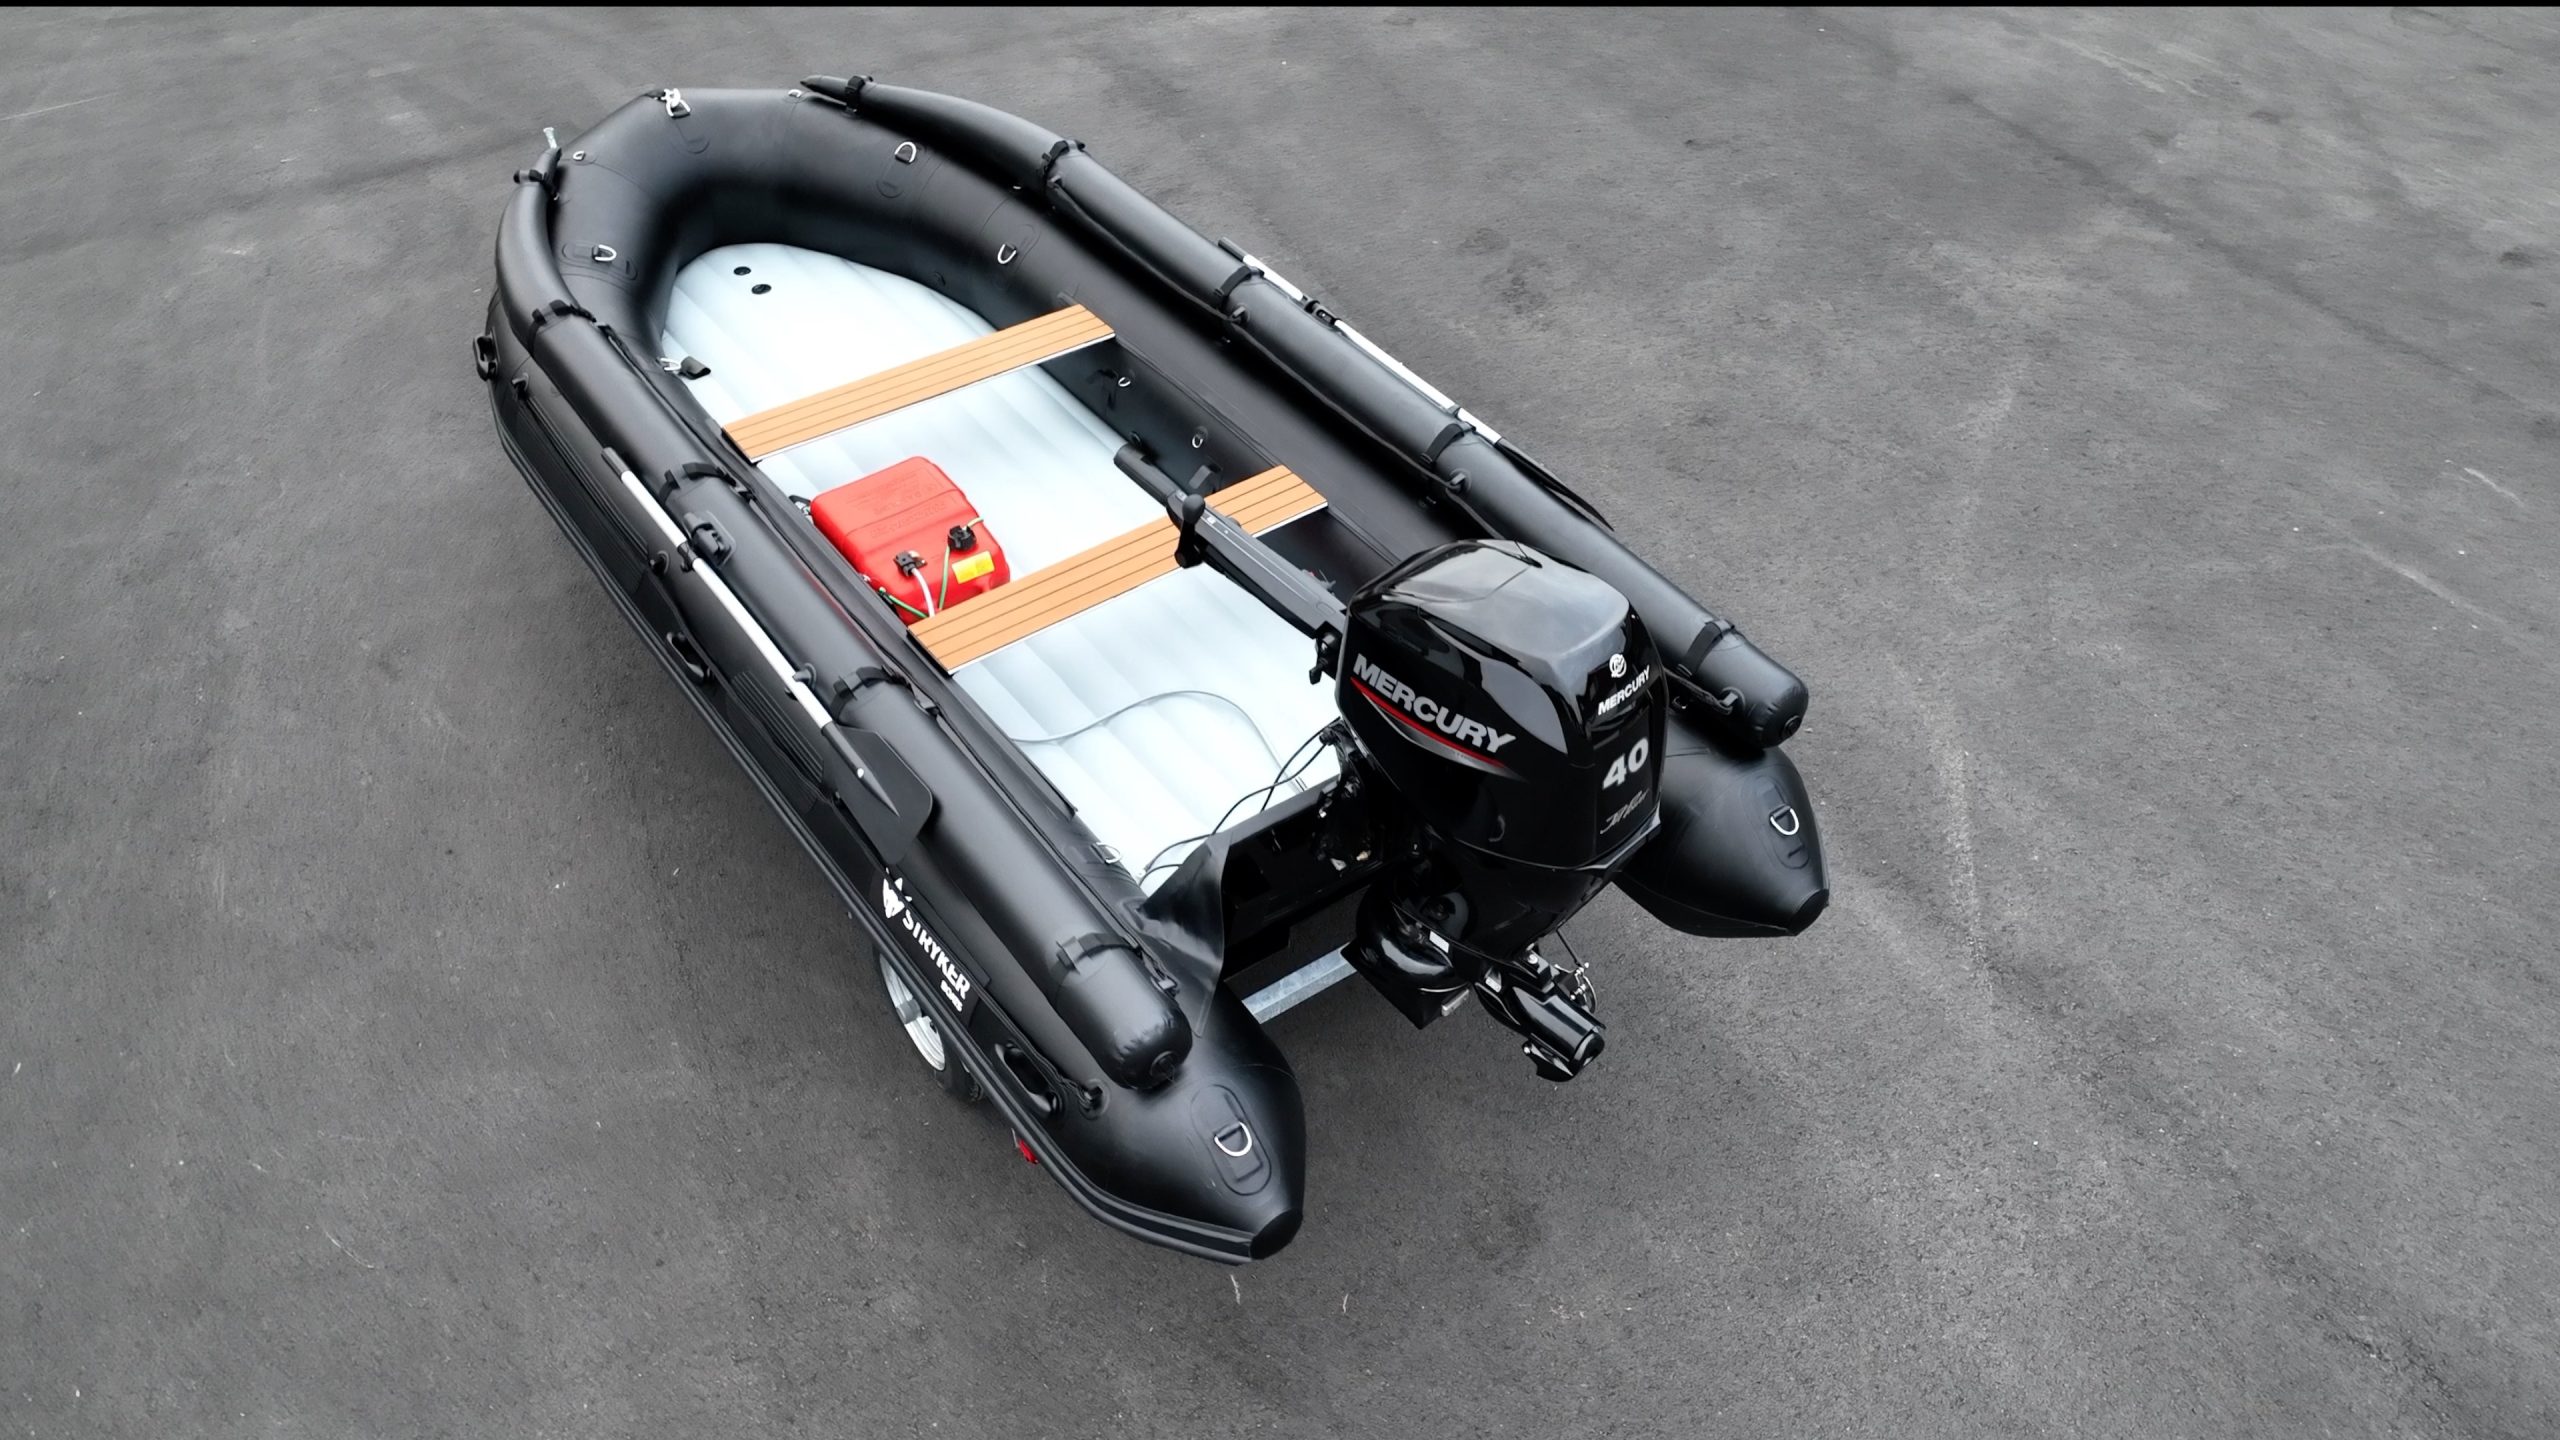 inflatable jet boat with air floor and mercury 40hp jet outboard